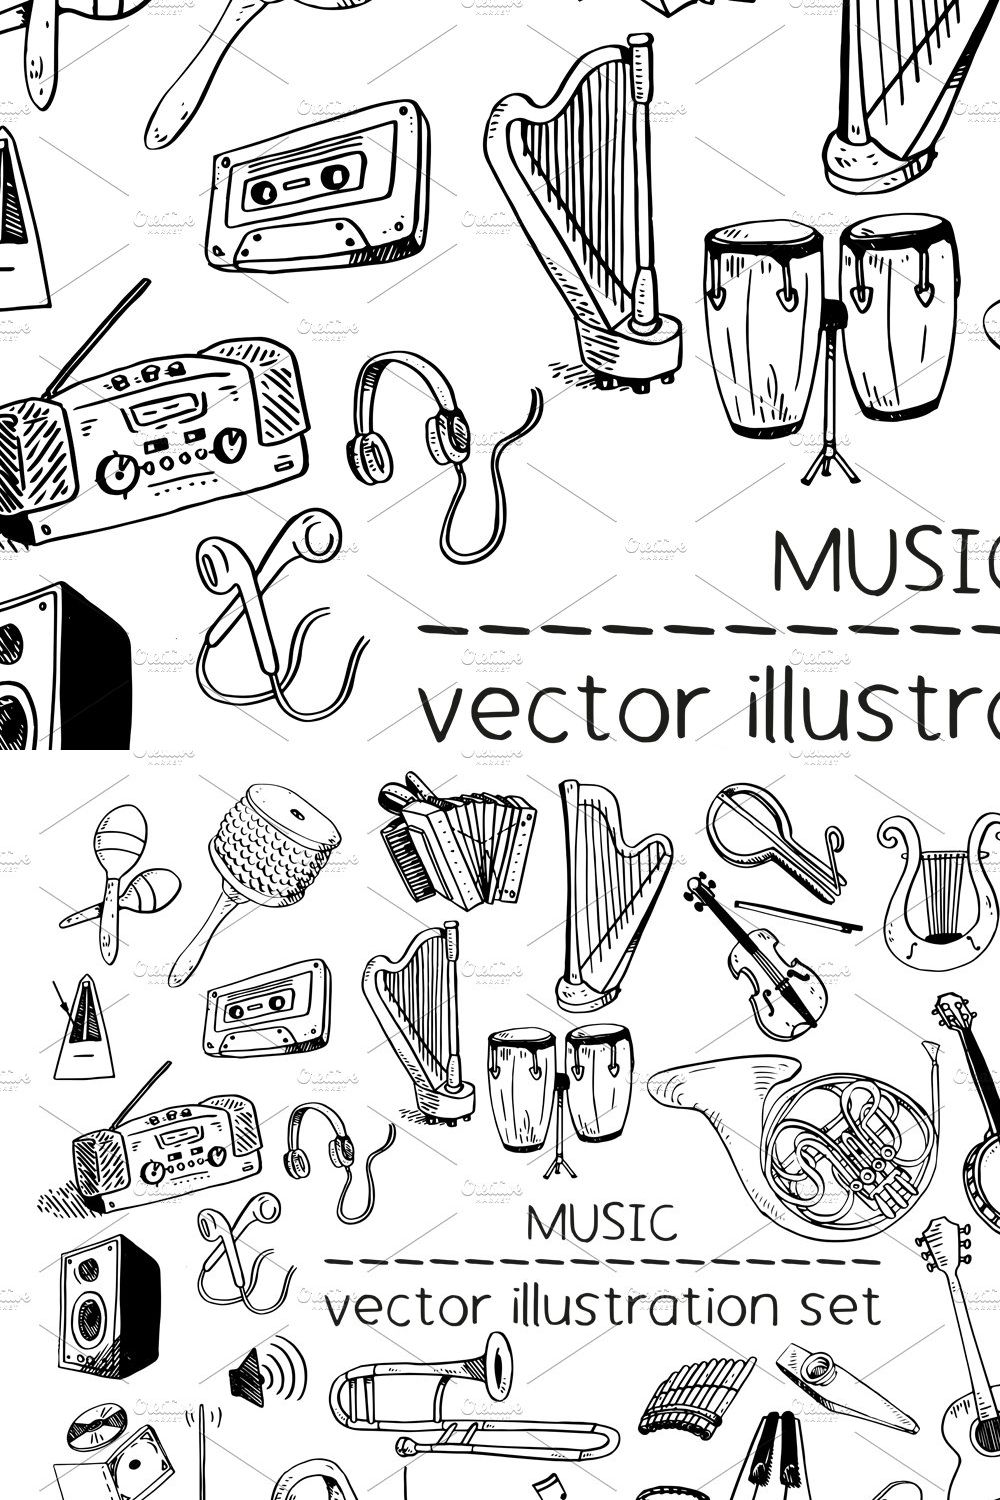 Music - vector illustrations pinterest preview image.